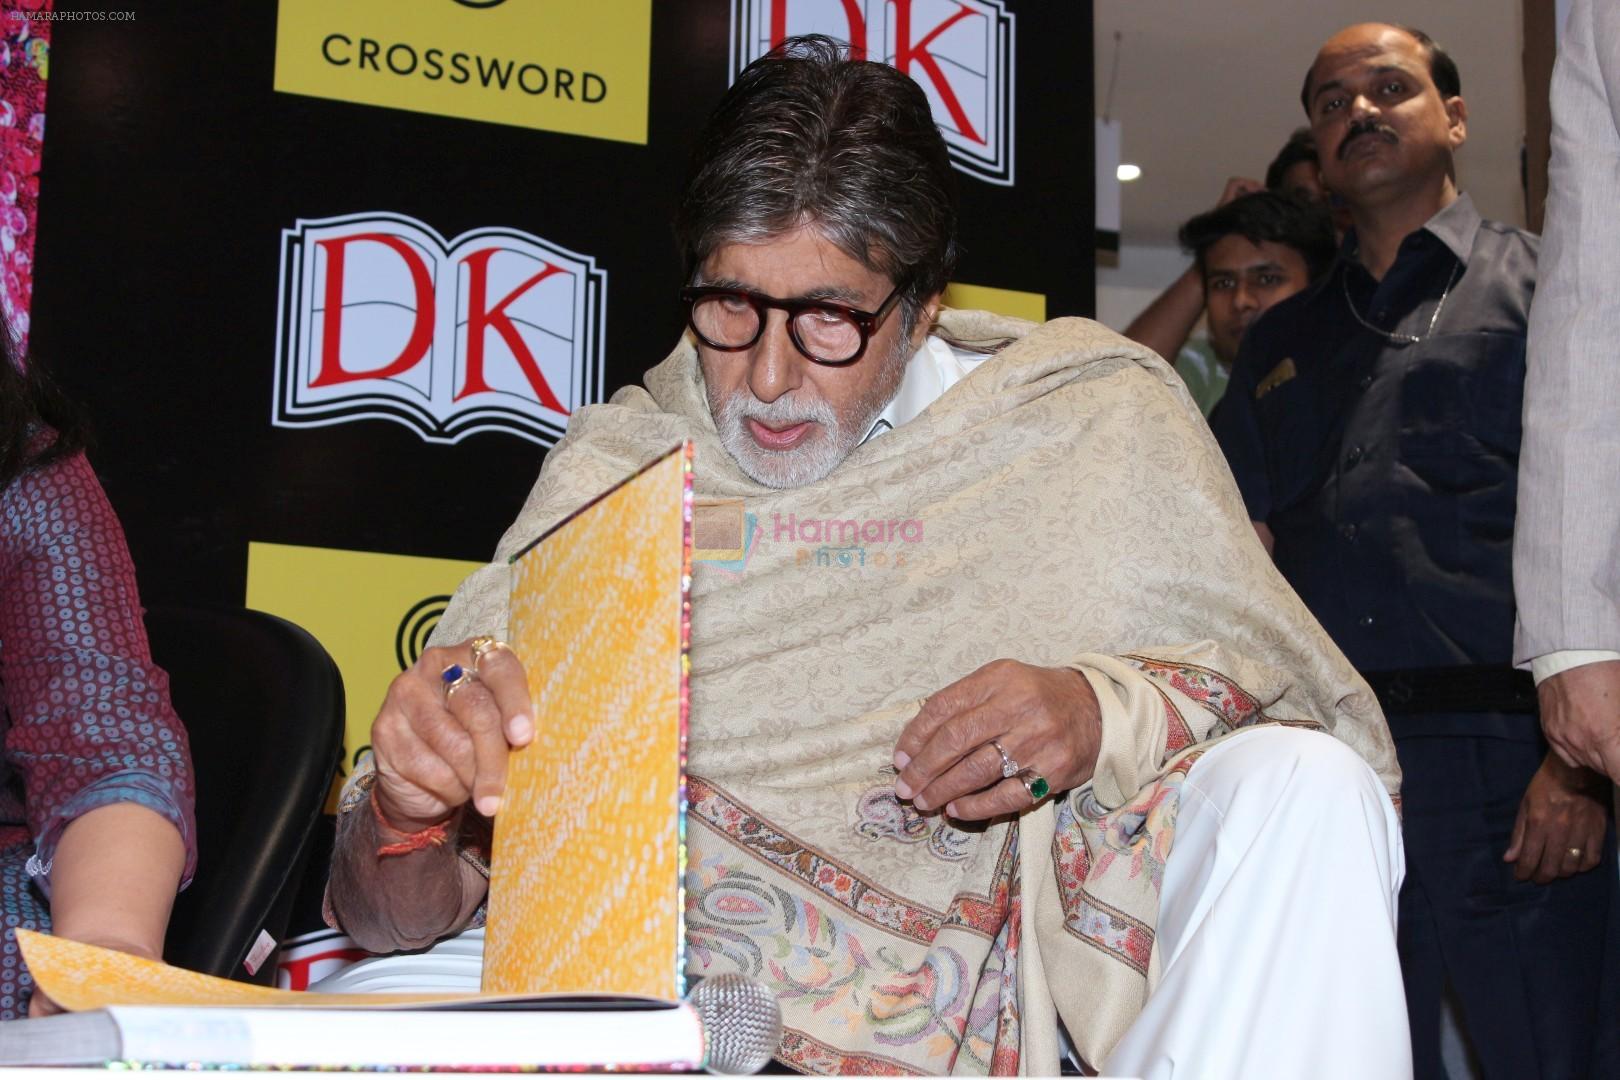 Amitabh Bachchan at the Launch Of Bollywood The Book on 2nd Dec 2017